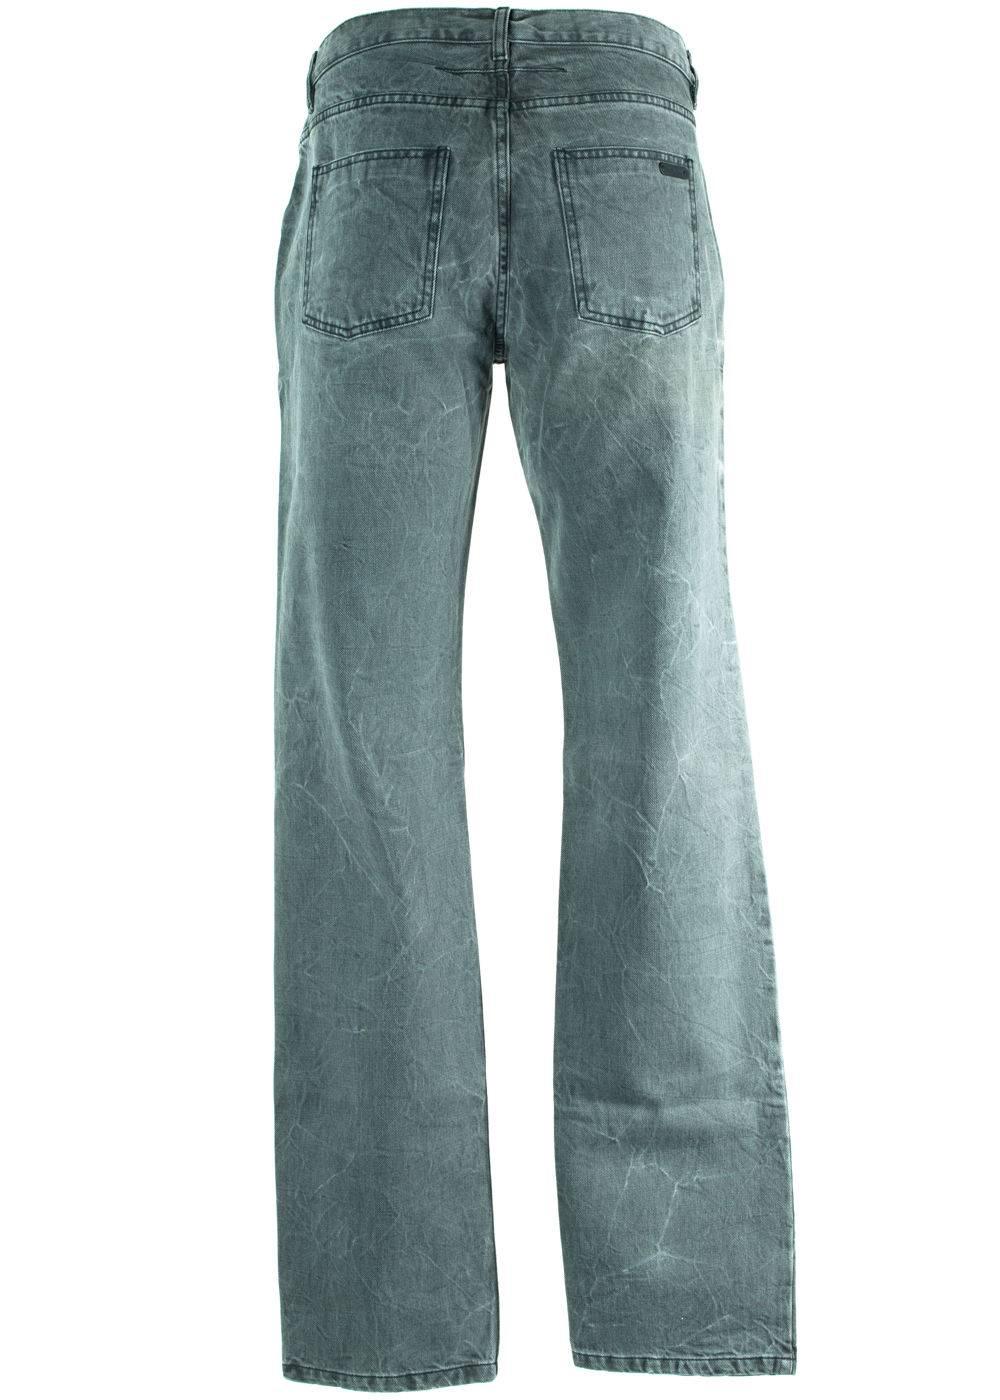 Givenchy Men's 100% Cotton Ash Gray Denim Jeans  In New Condition For Sale In Brooklyn, NY